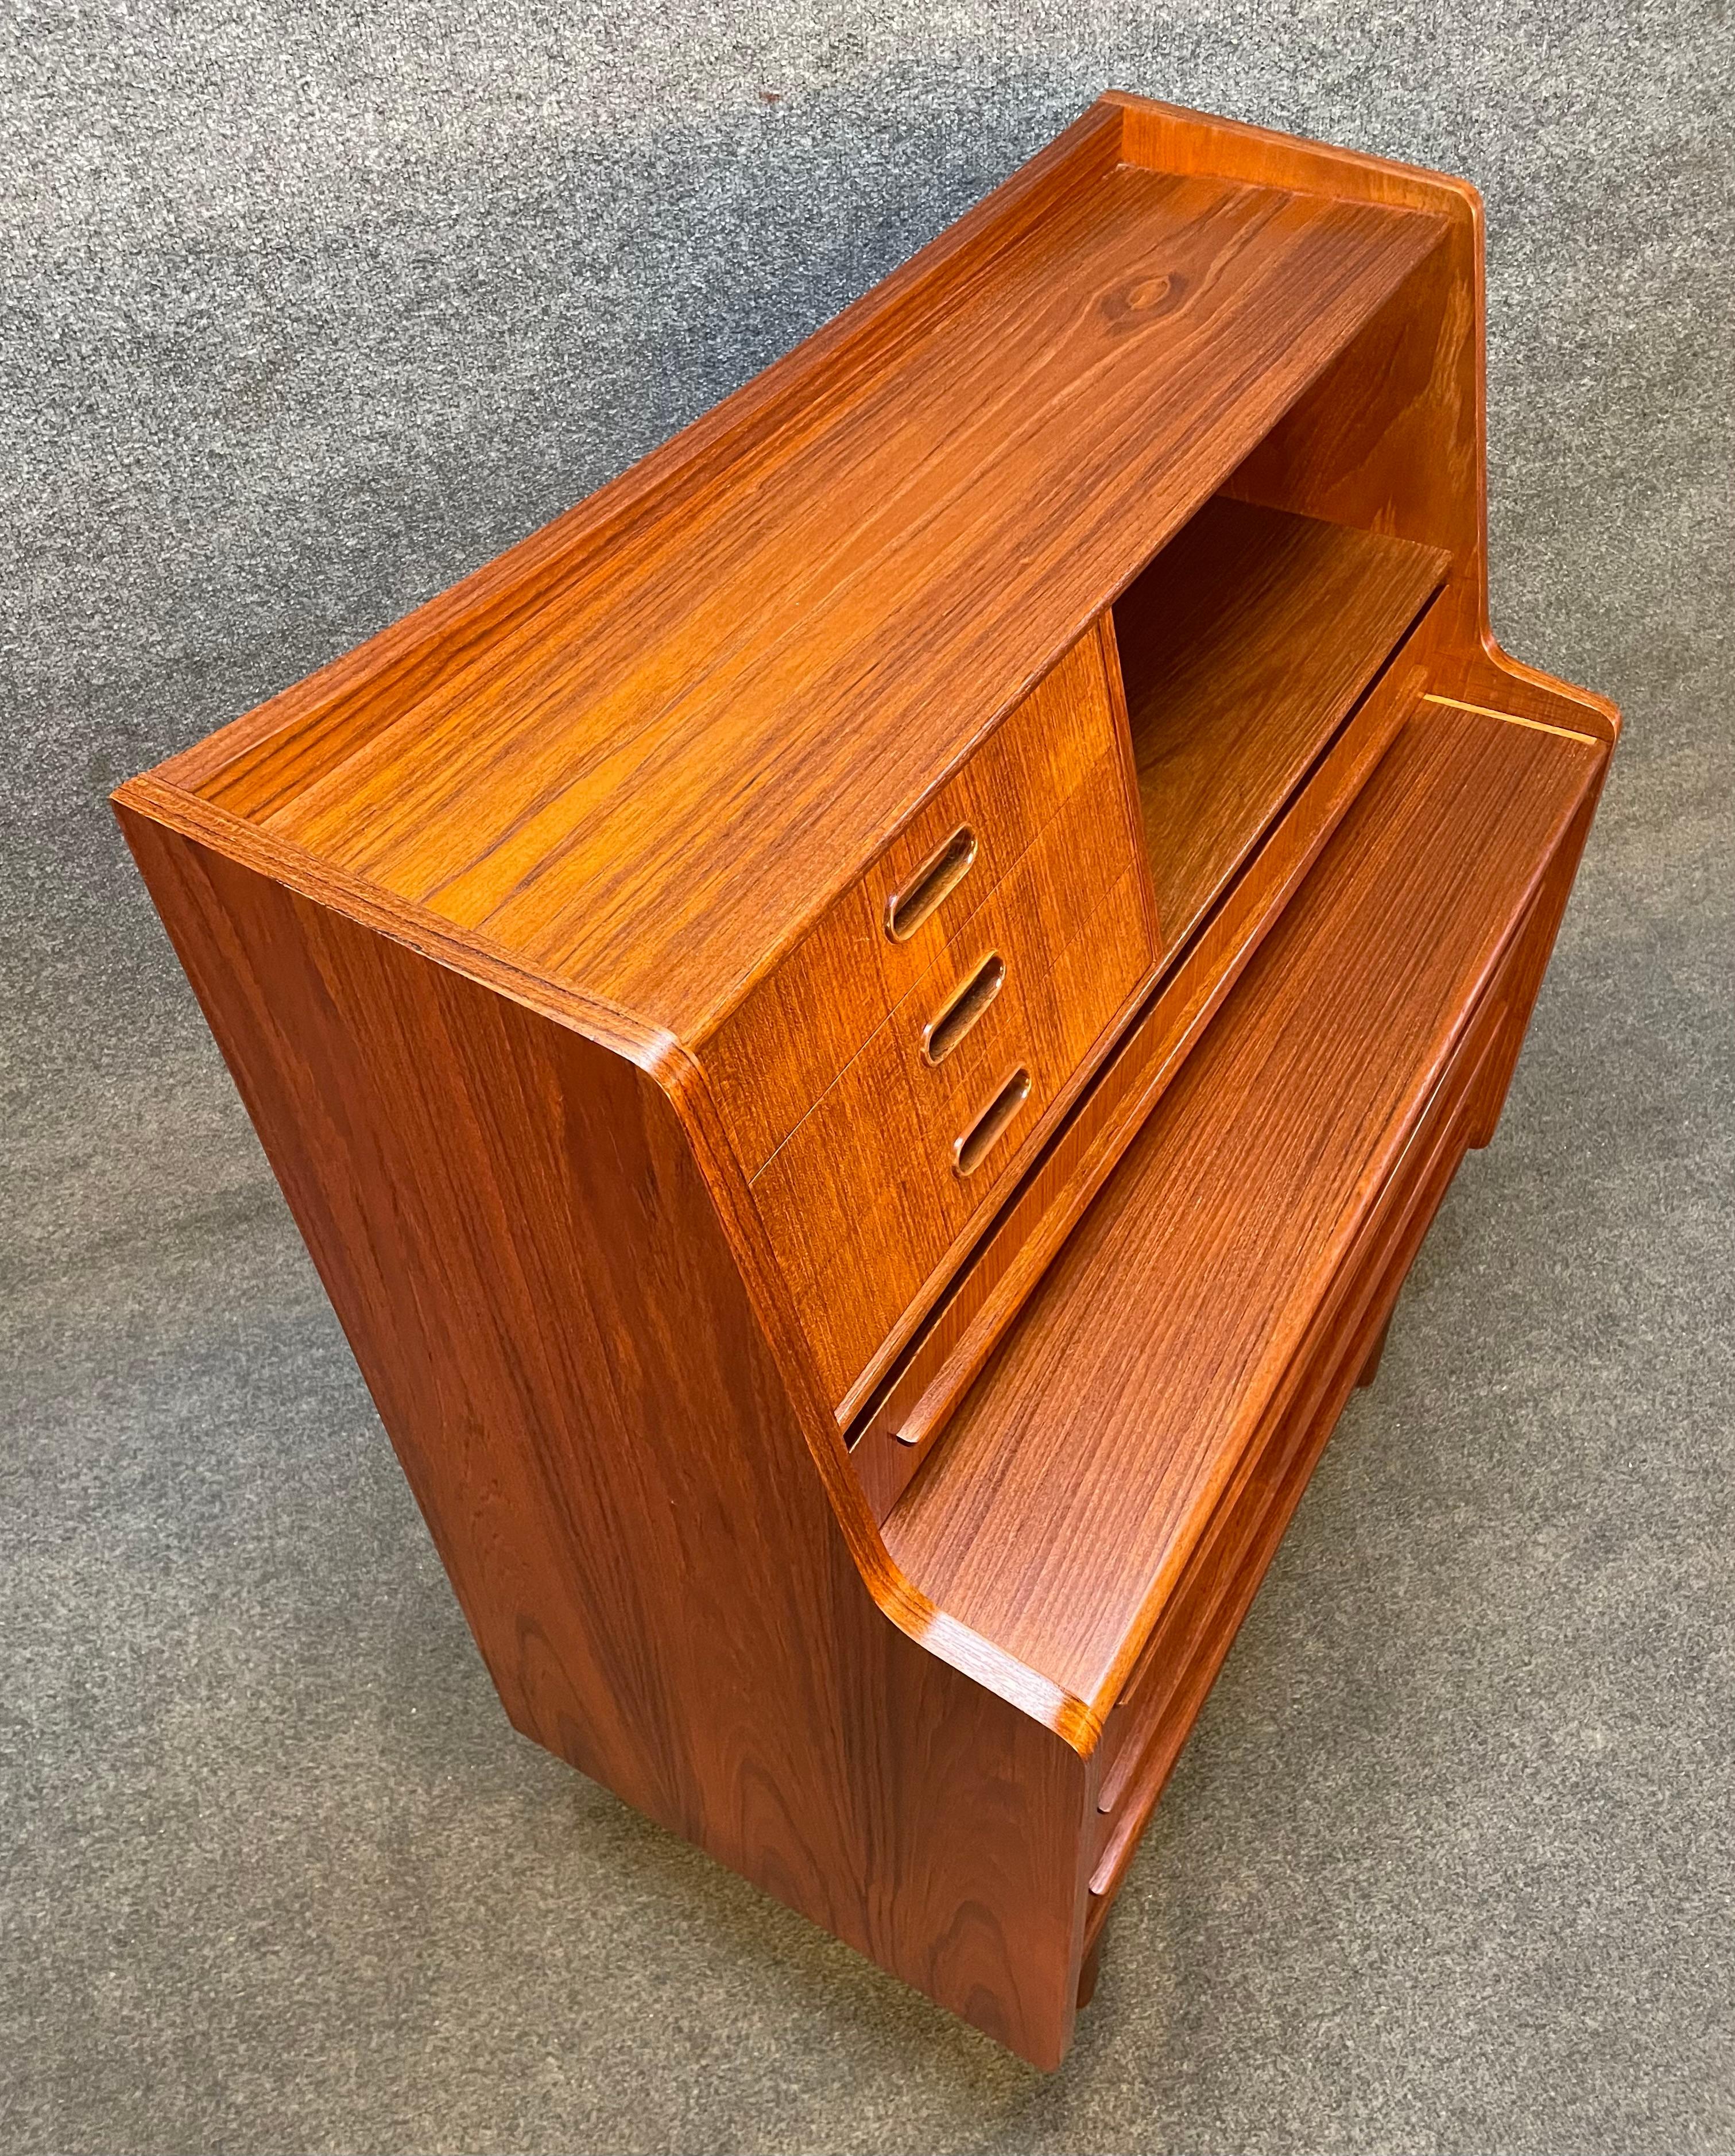 Here is a beautiful Scandinavian secretary desk in teak manufactured by Gunnar Falsigs in Denmark in the 1960s. This exquisite piece, recently imported from Copenhagen to California, features a vibrant wood grain with many storage options: On its